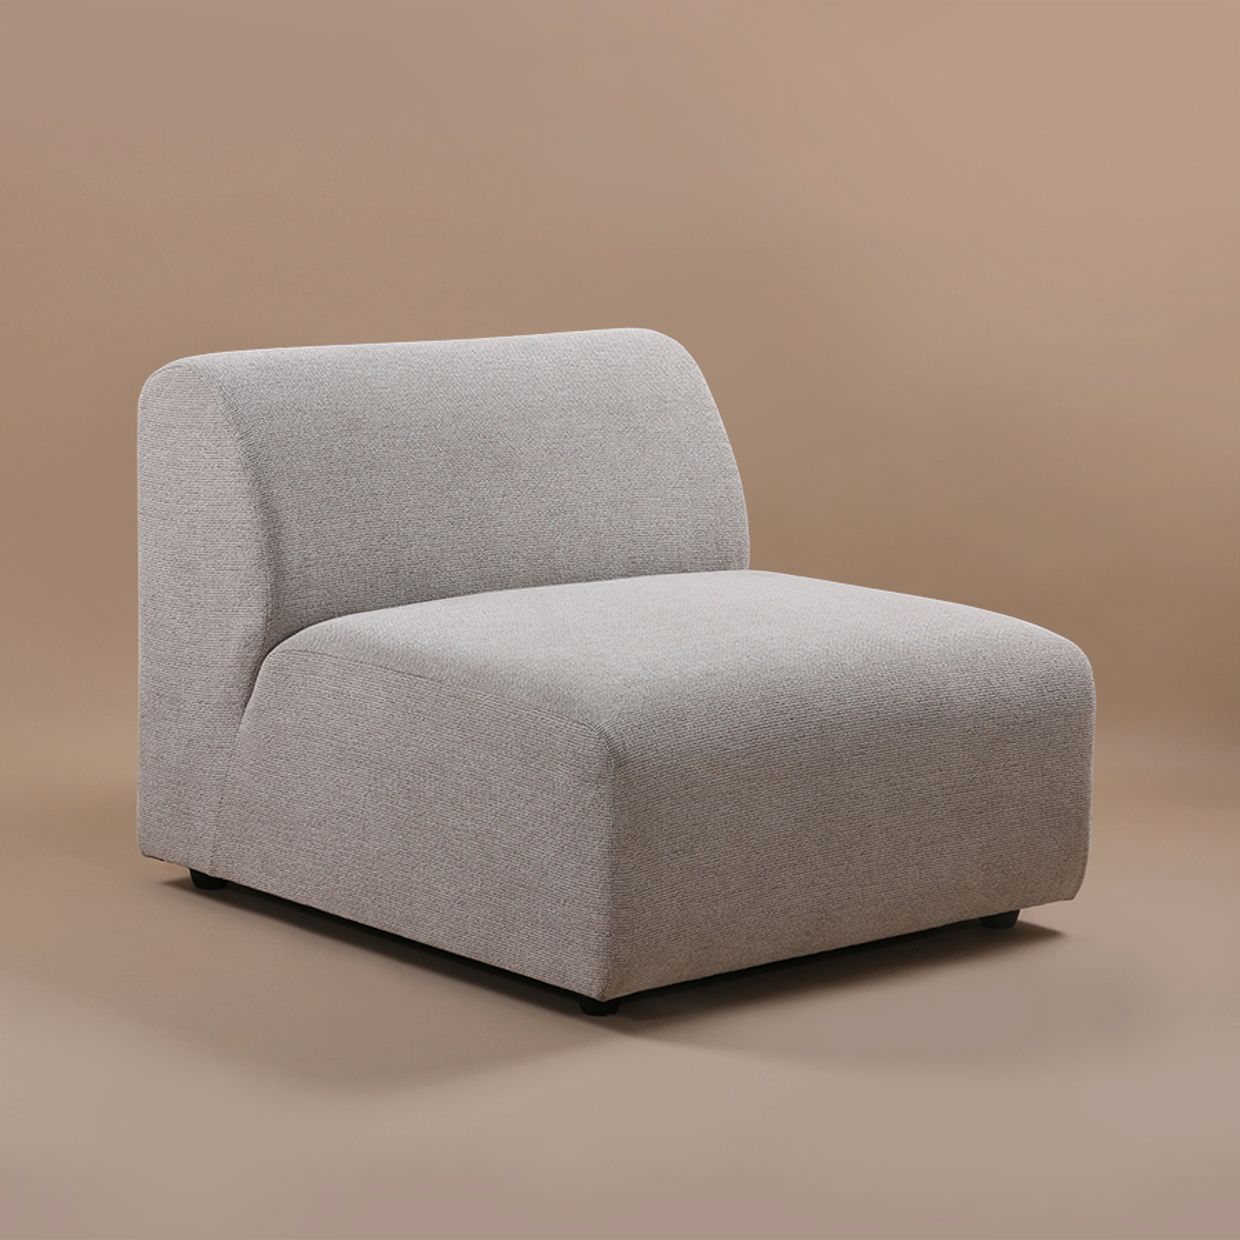 Jax couch: element middle, sneak, light grey